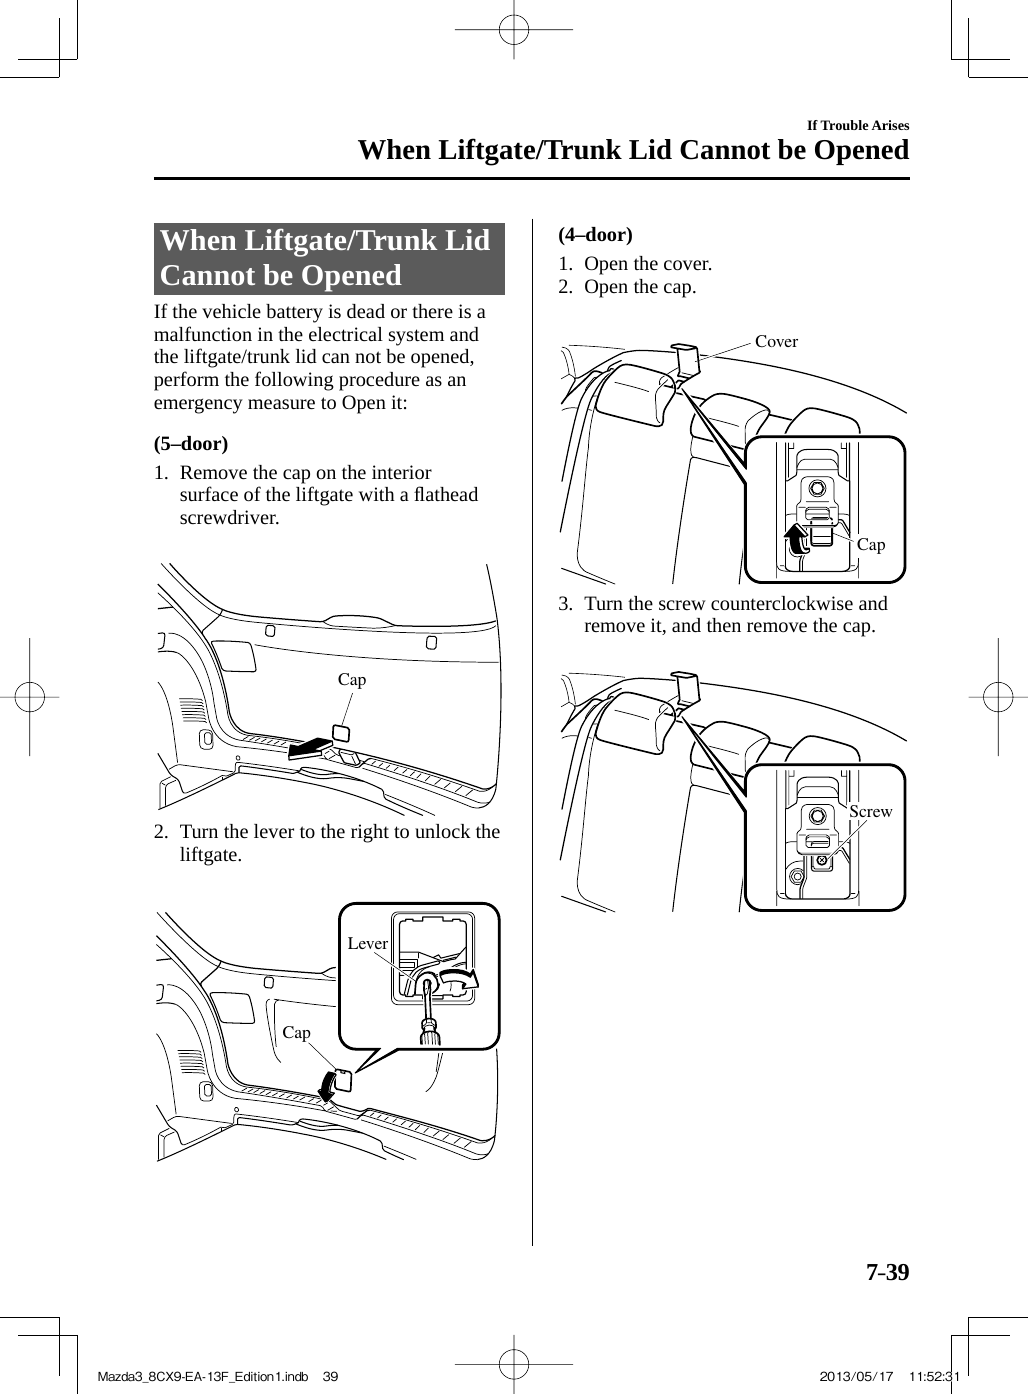 7–39If Trouble ArisesWhen Liftgate/Trunk Lid Cannot be Opened             When  Liftgate/Trunk  Lid Cannot be Opened    If the vehicle battery is dead or there is a malfunction in the electrical system and the liftgate/trunk lid can not be opened, perform the following procedure as an emergency measure to Open it:  (5–door)     1.   Remove  the  cap  on  the  interior surface of the liftgate with a ﬂ athead screwdriver.    Cap    2.   Turn the lever to the right to unlock the liftgate.    LeverCap     (4–door)     1.   Open  the  cover.   2.   Open  the  cap.    CoverCap    3.   Turn  the  screw  counterclockwise  and remove it, and then remove the cap.    Screw Mazda3_8CX9-EA-13F_Edition1.indb   39Mazda3_8CX9-EA-13F_Edition1.indb   39 2013/05/17   11:52:312013/05/17   11:52:31